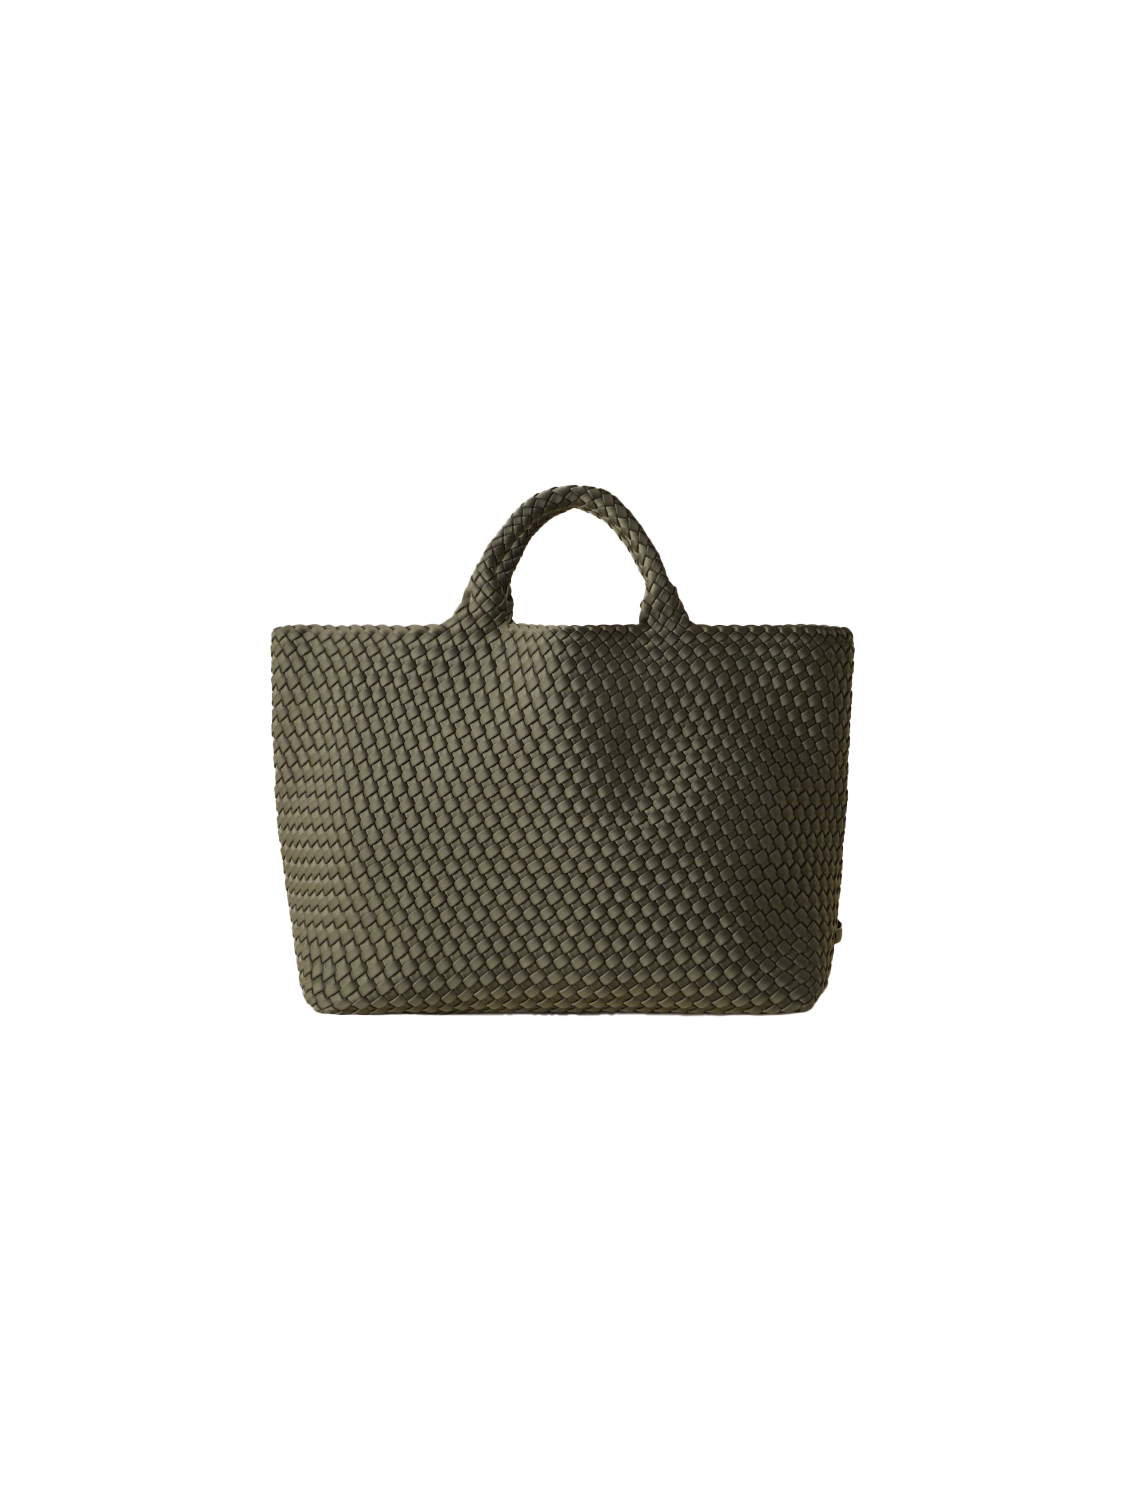 Large Tote - Woven bag 